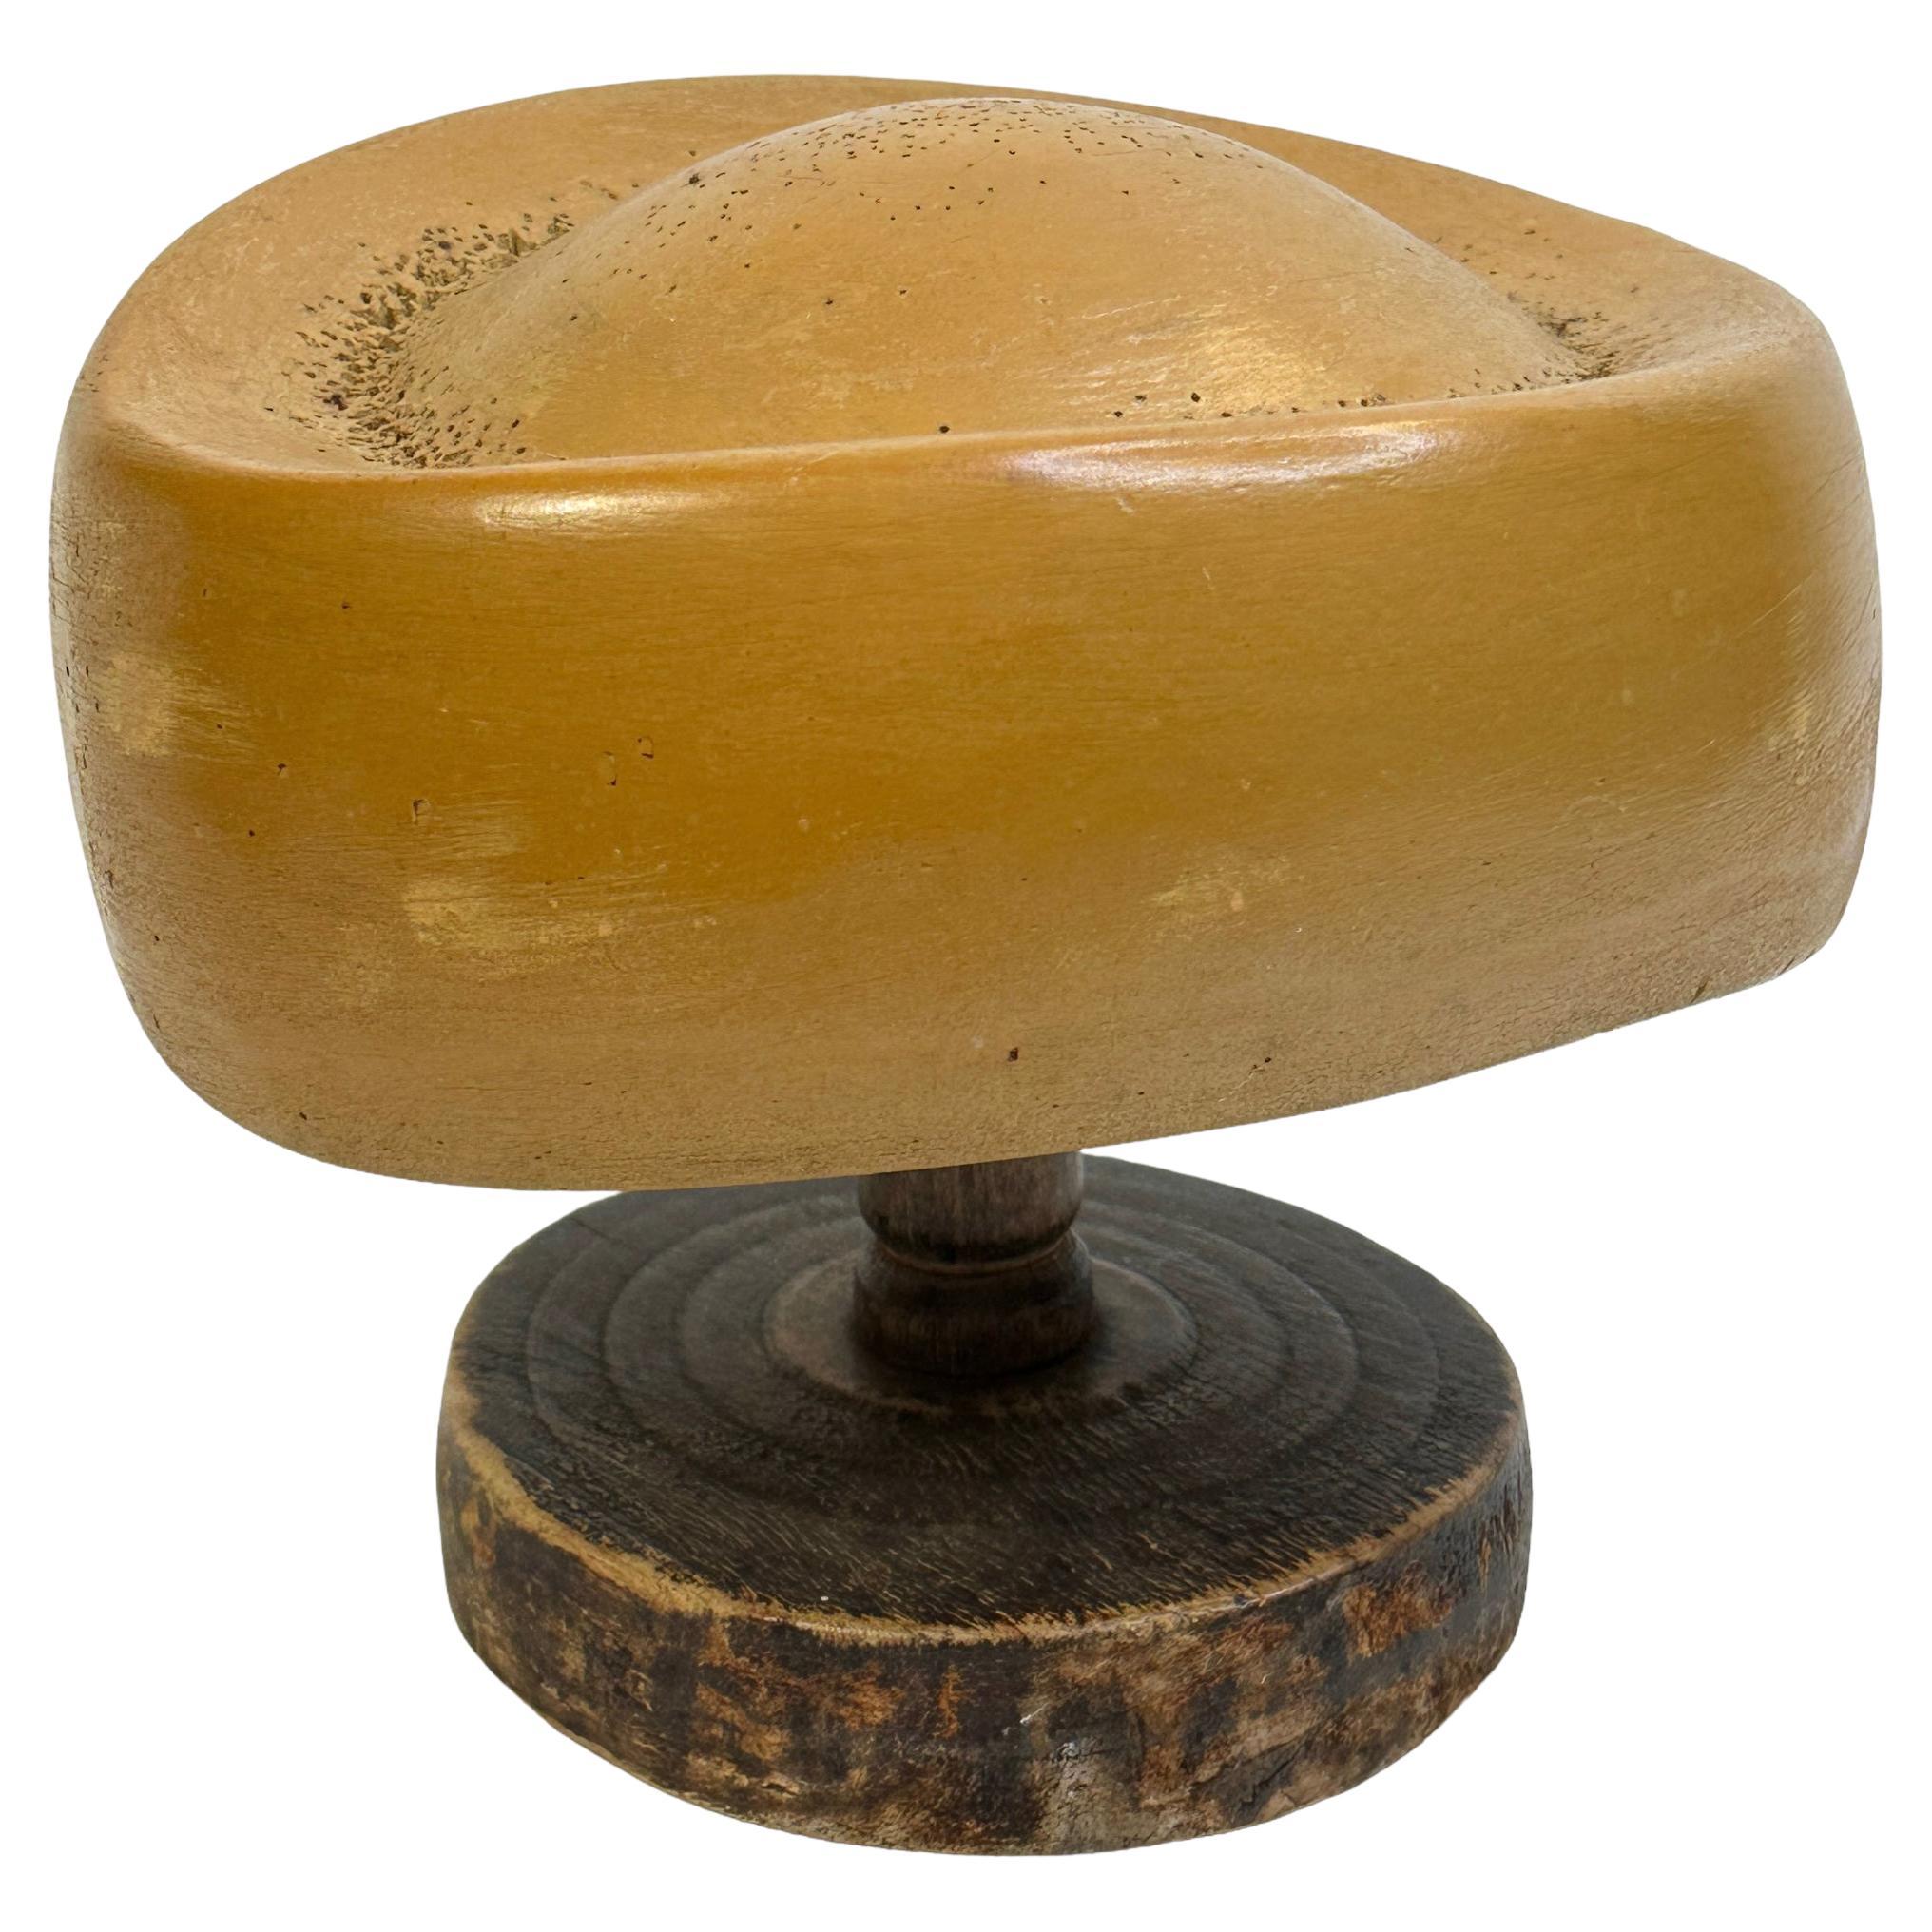 Stunning beautiful wooden hat form mold, found at an estate sale in Vienna, Austria. Has the form of the typical Art Deco style. So we believe it was made in the 1920s. Nice decoration item or a beautiful stand to display your hat in the dressing